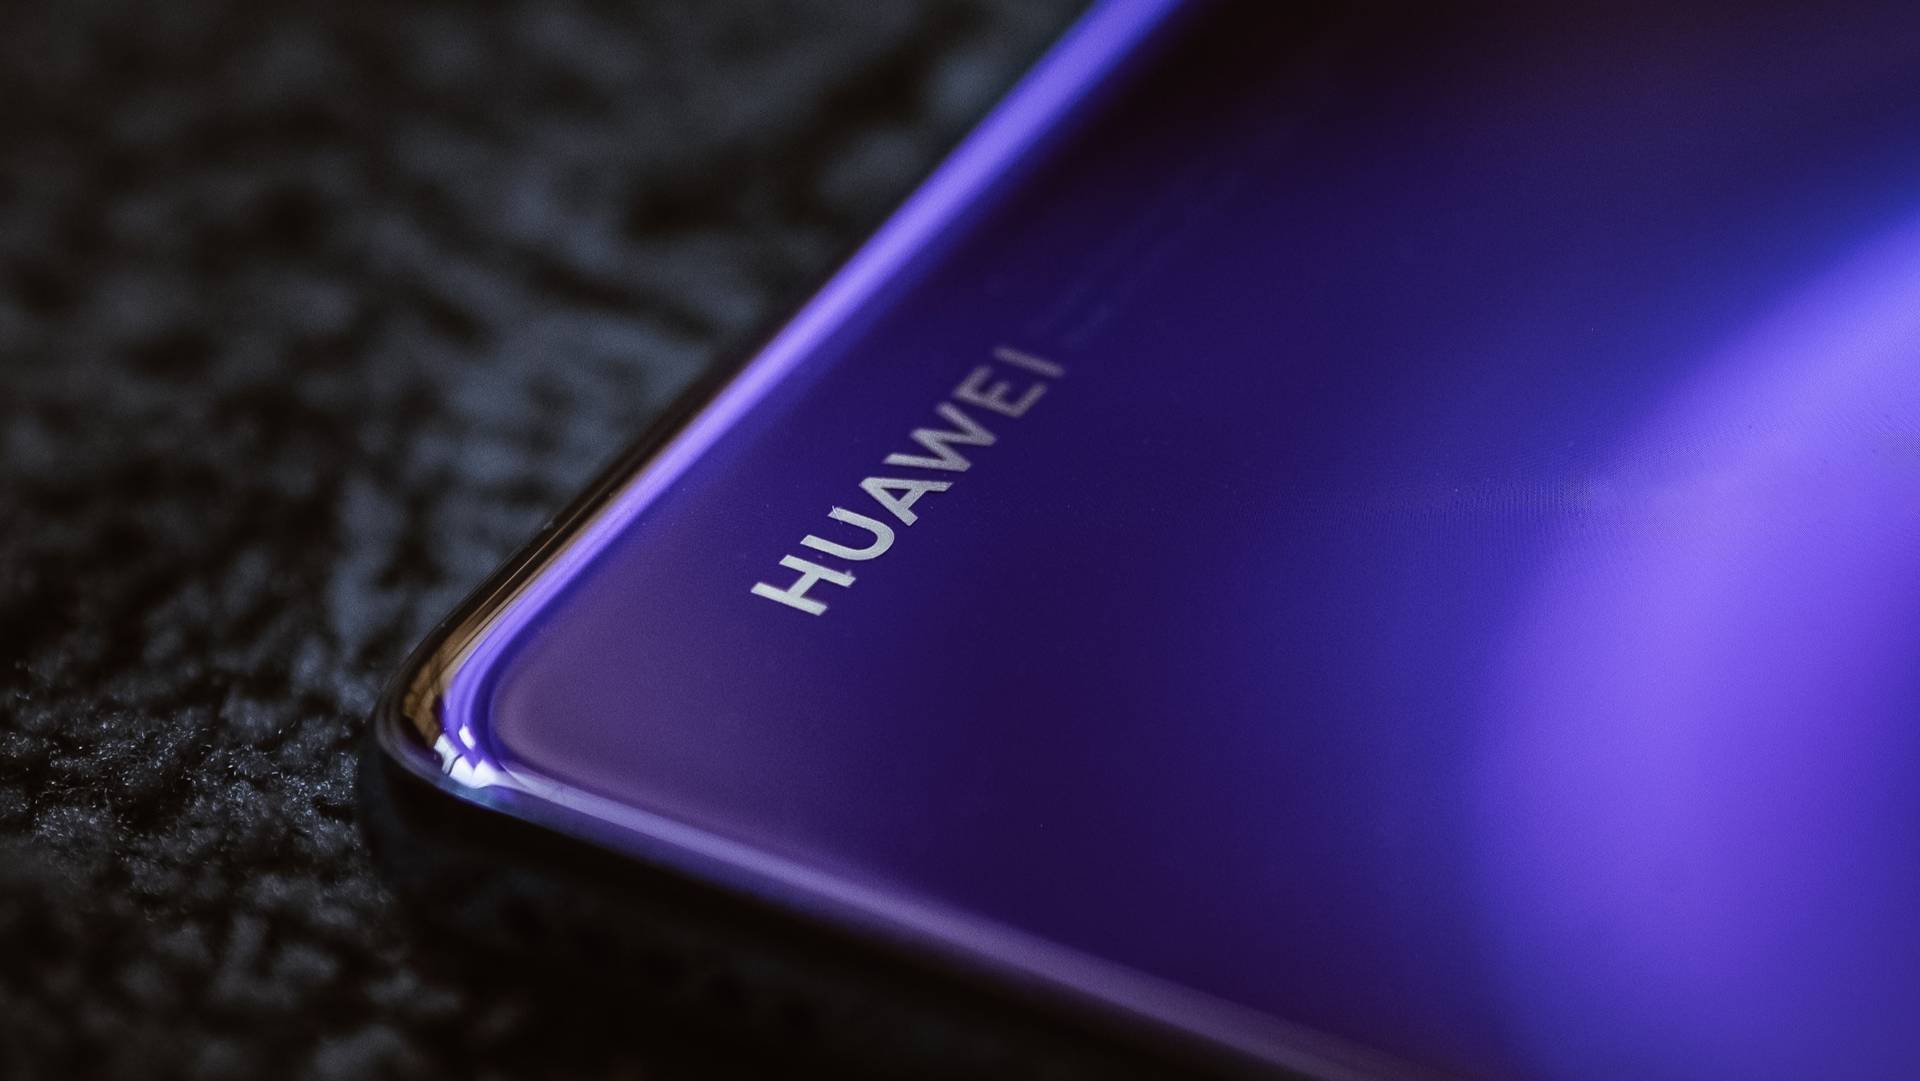 The next Huawei flagship camera phone could be official by the end of the month